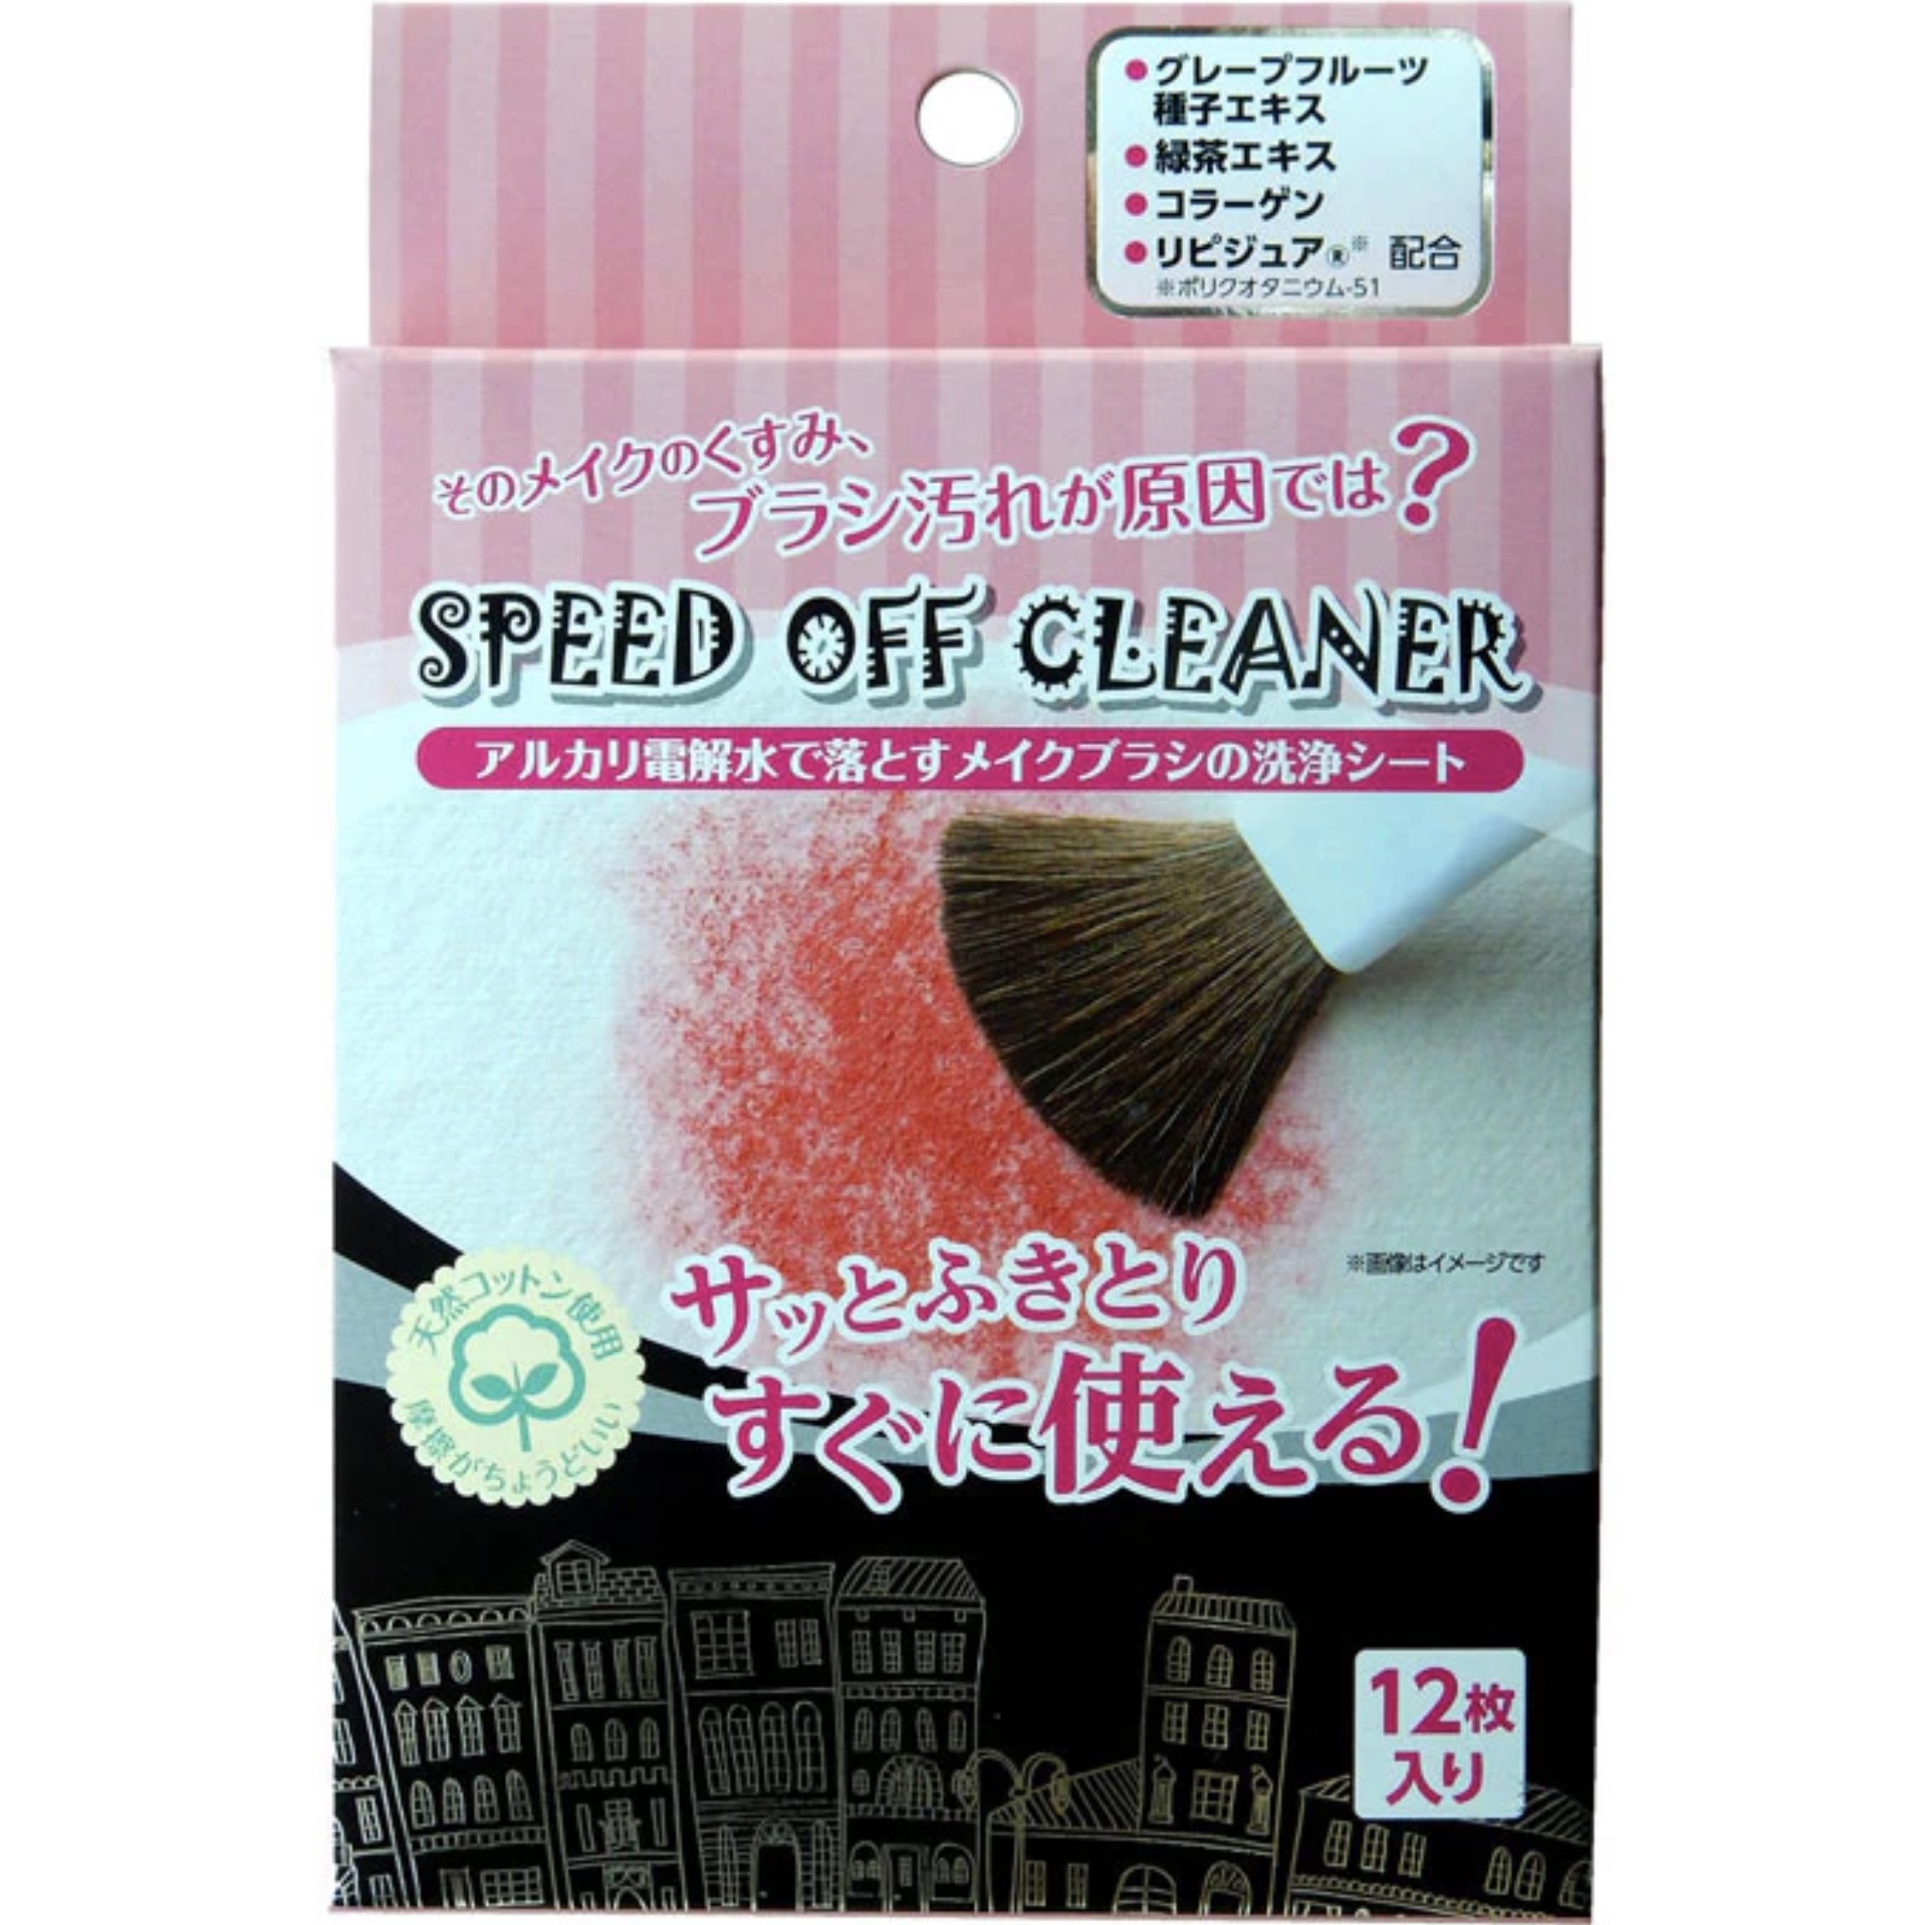 Naissance Makeup Brush Cleaning Sheet Speed Off Cleaner (Pack of 12)